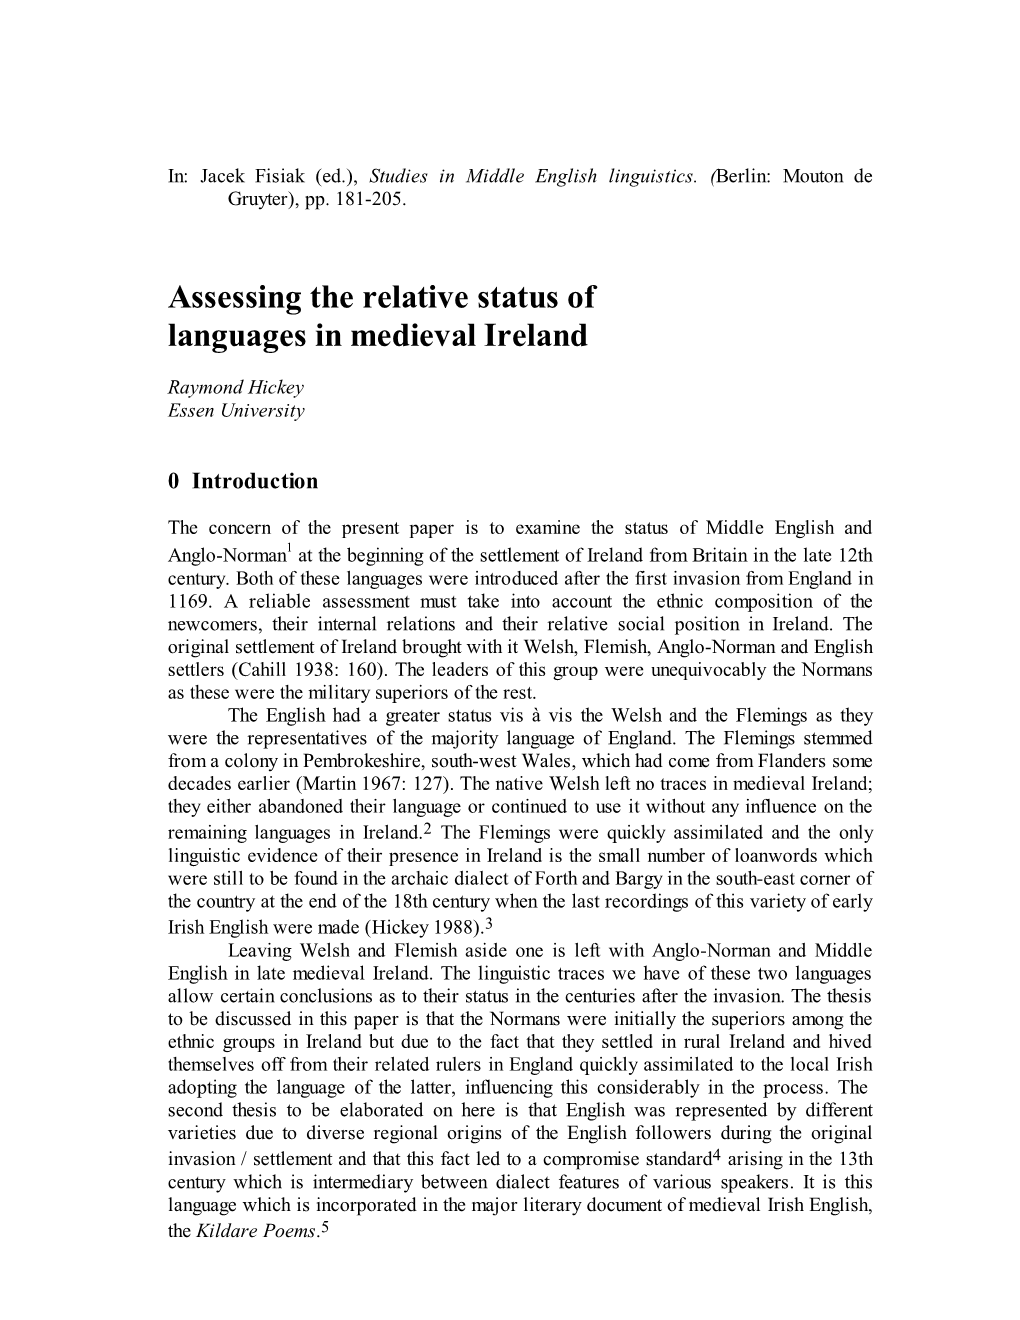 Assessing the Relative Status of Languages in Medieval Ireland